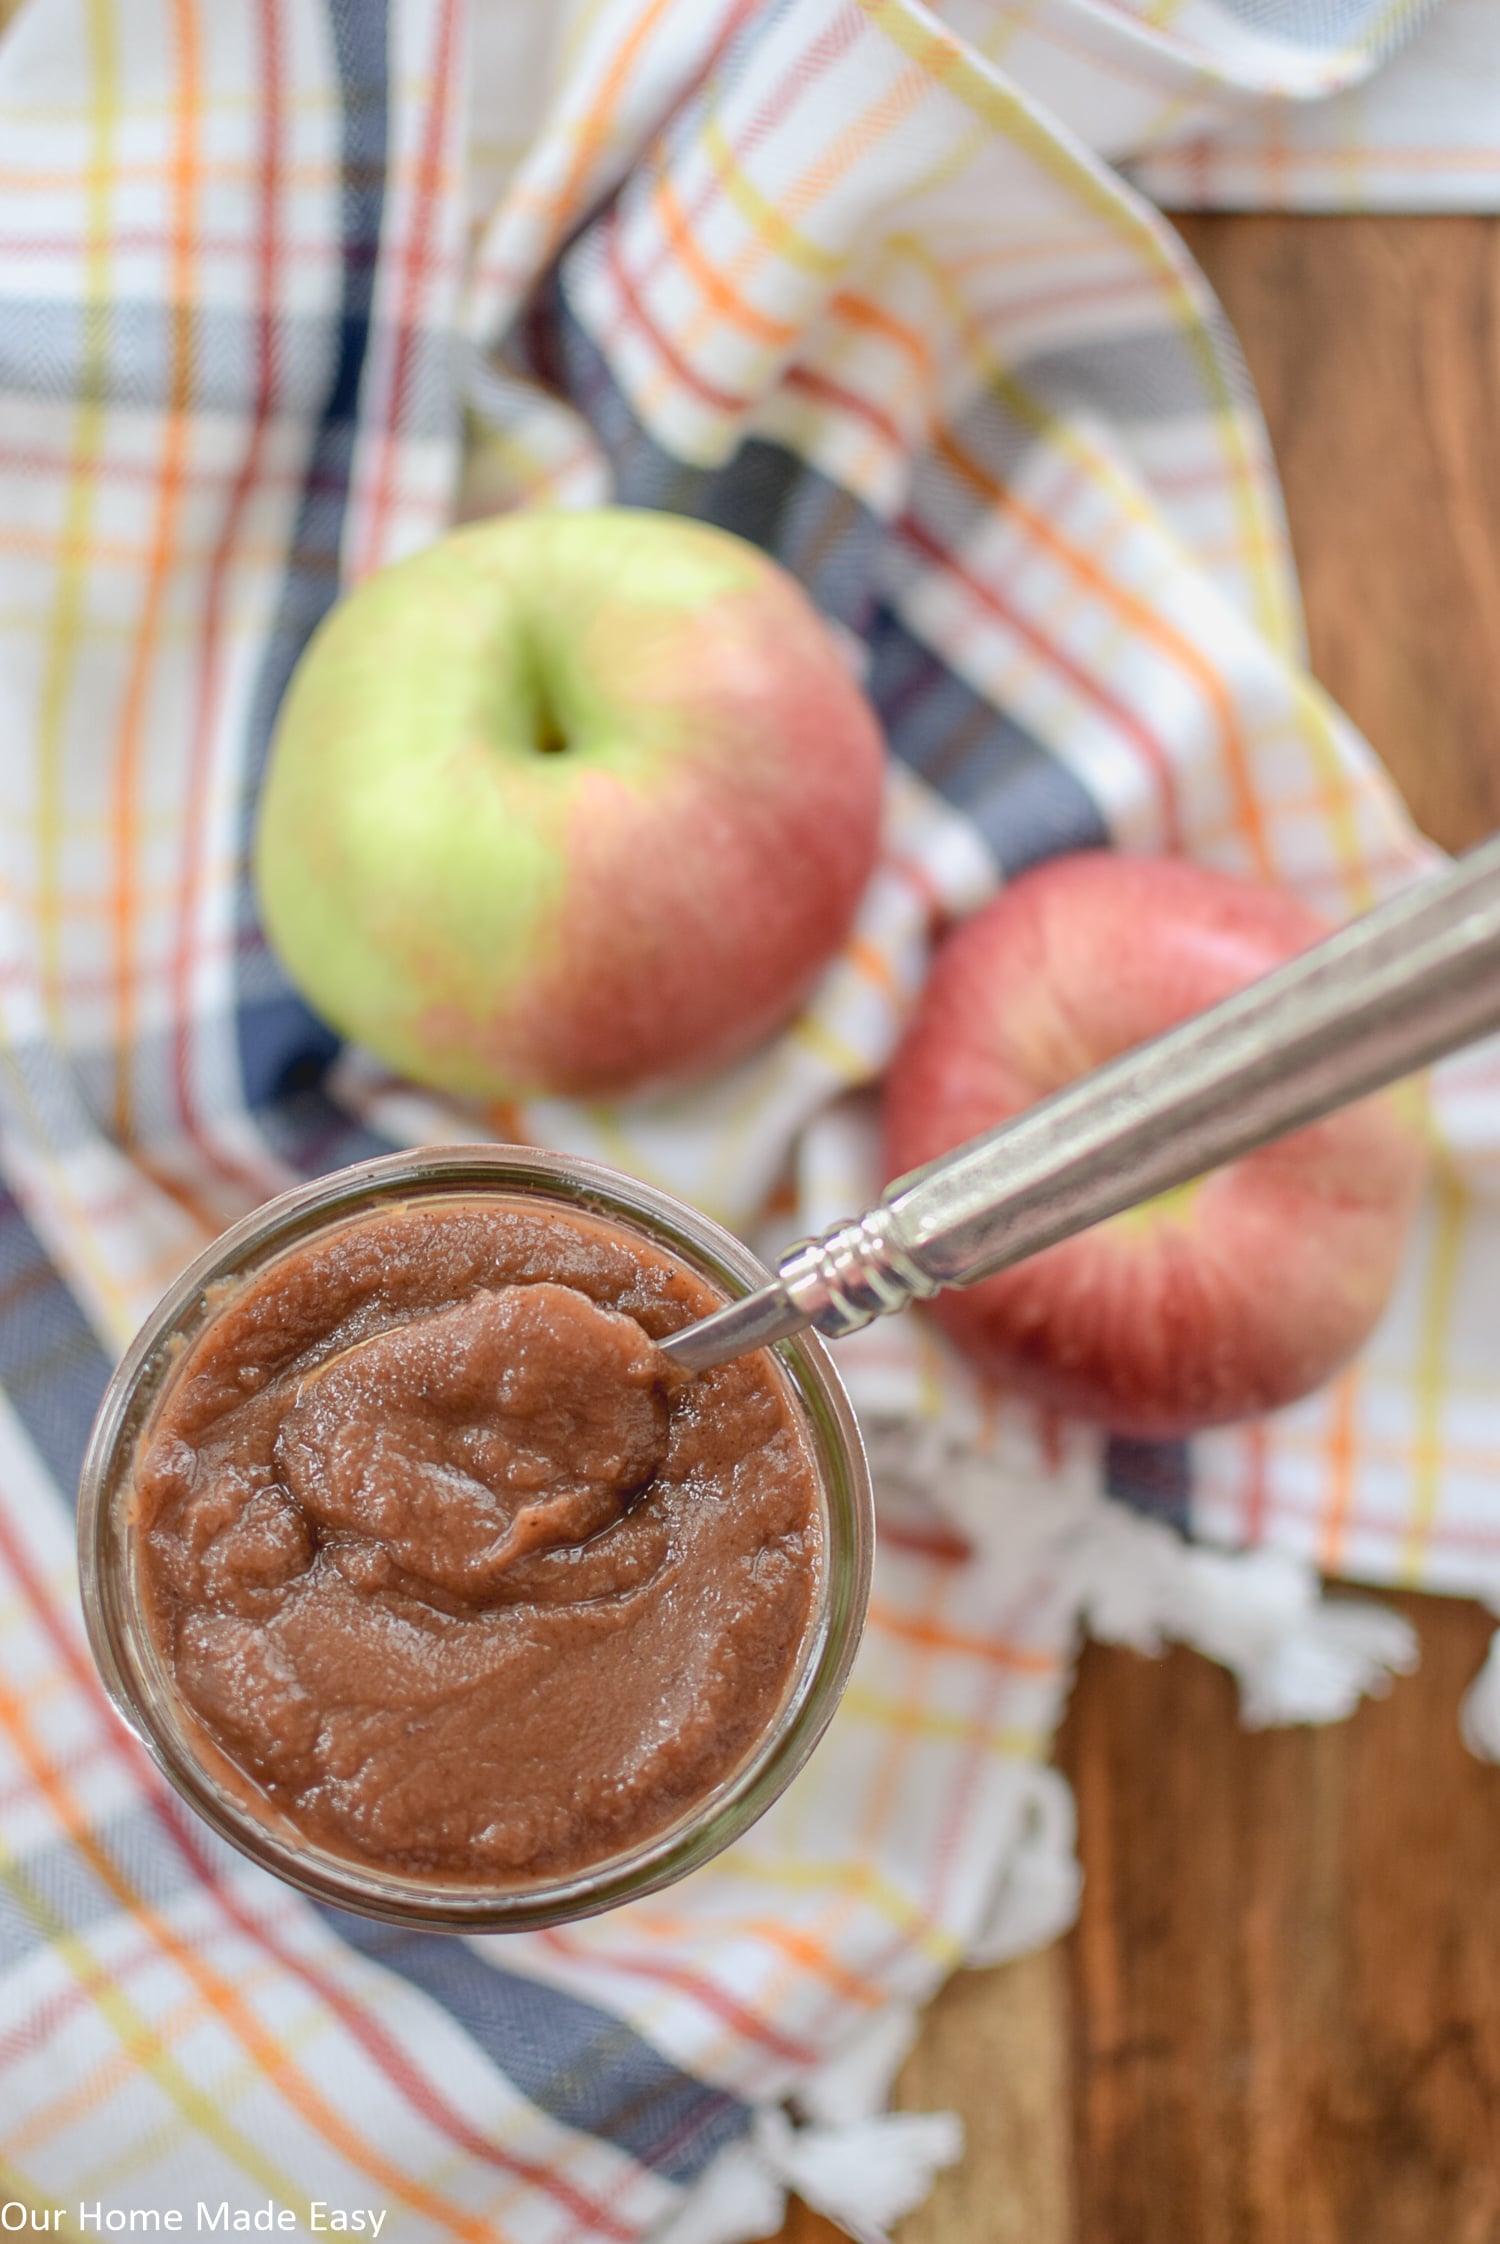 This homemade crockpot apple butter recipe is so easy and made extra fresh with fresh-picked apples